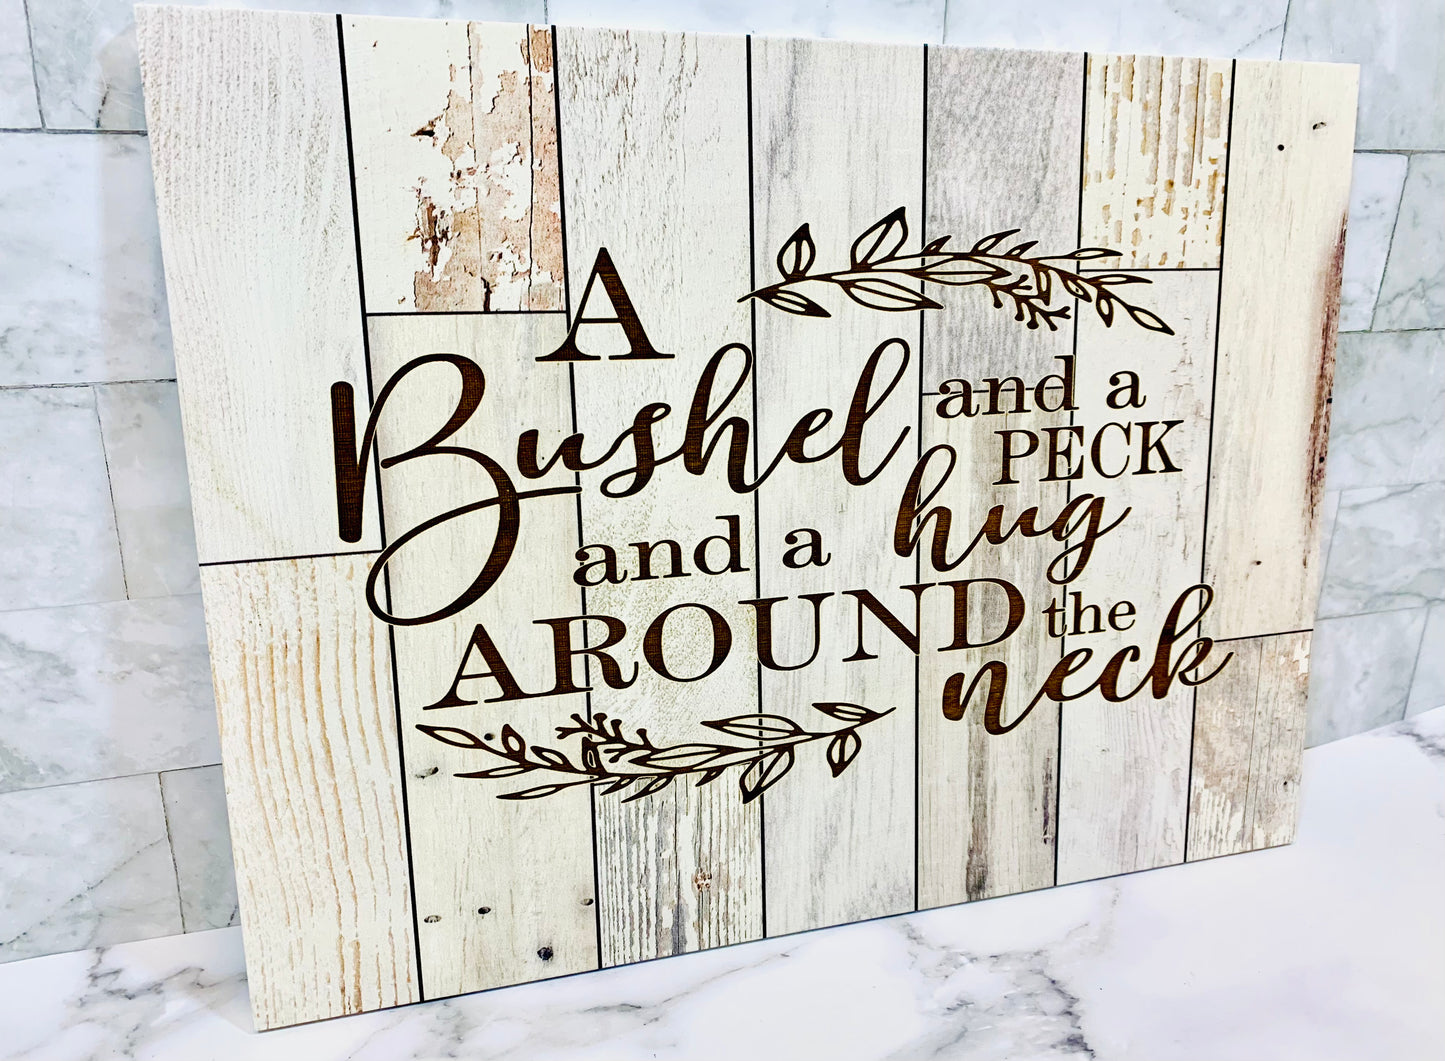 A Bushel And A Peck And A Hug Around The Neck Personalized 12" x 16" Faux Wood Sign - MixMatched Creations